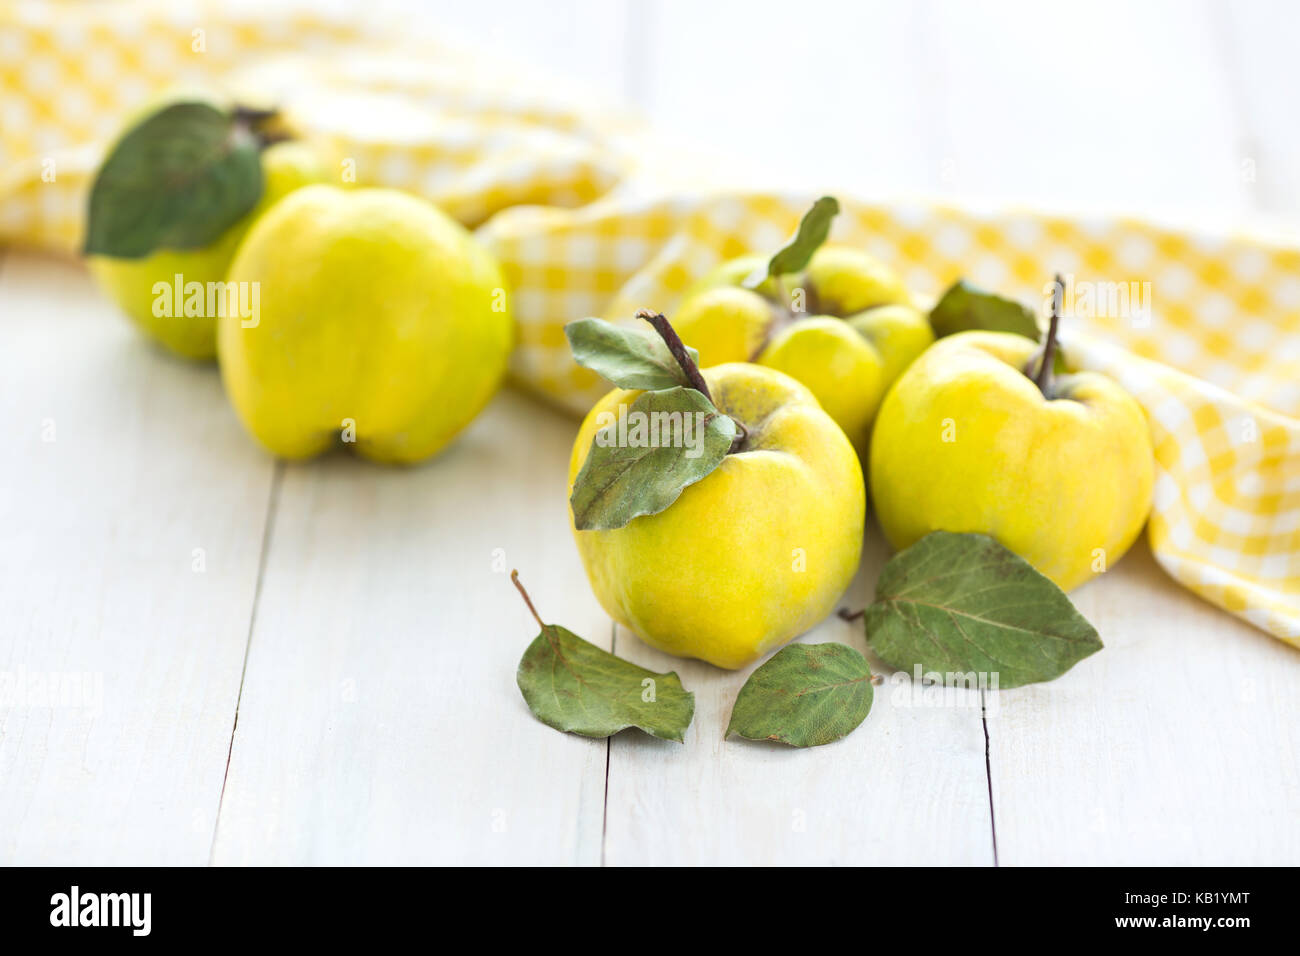 healthy lifestyle, nutrition, autumn concept. on white desk there are extremely bright yellow fruits called quince, that are very healthy, contains a lot of vitamins Stock Photo